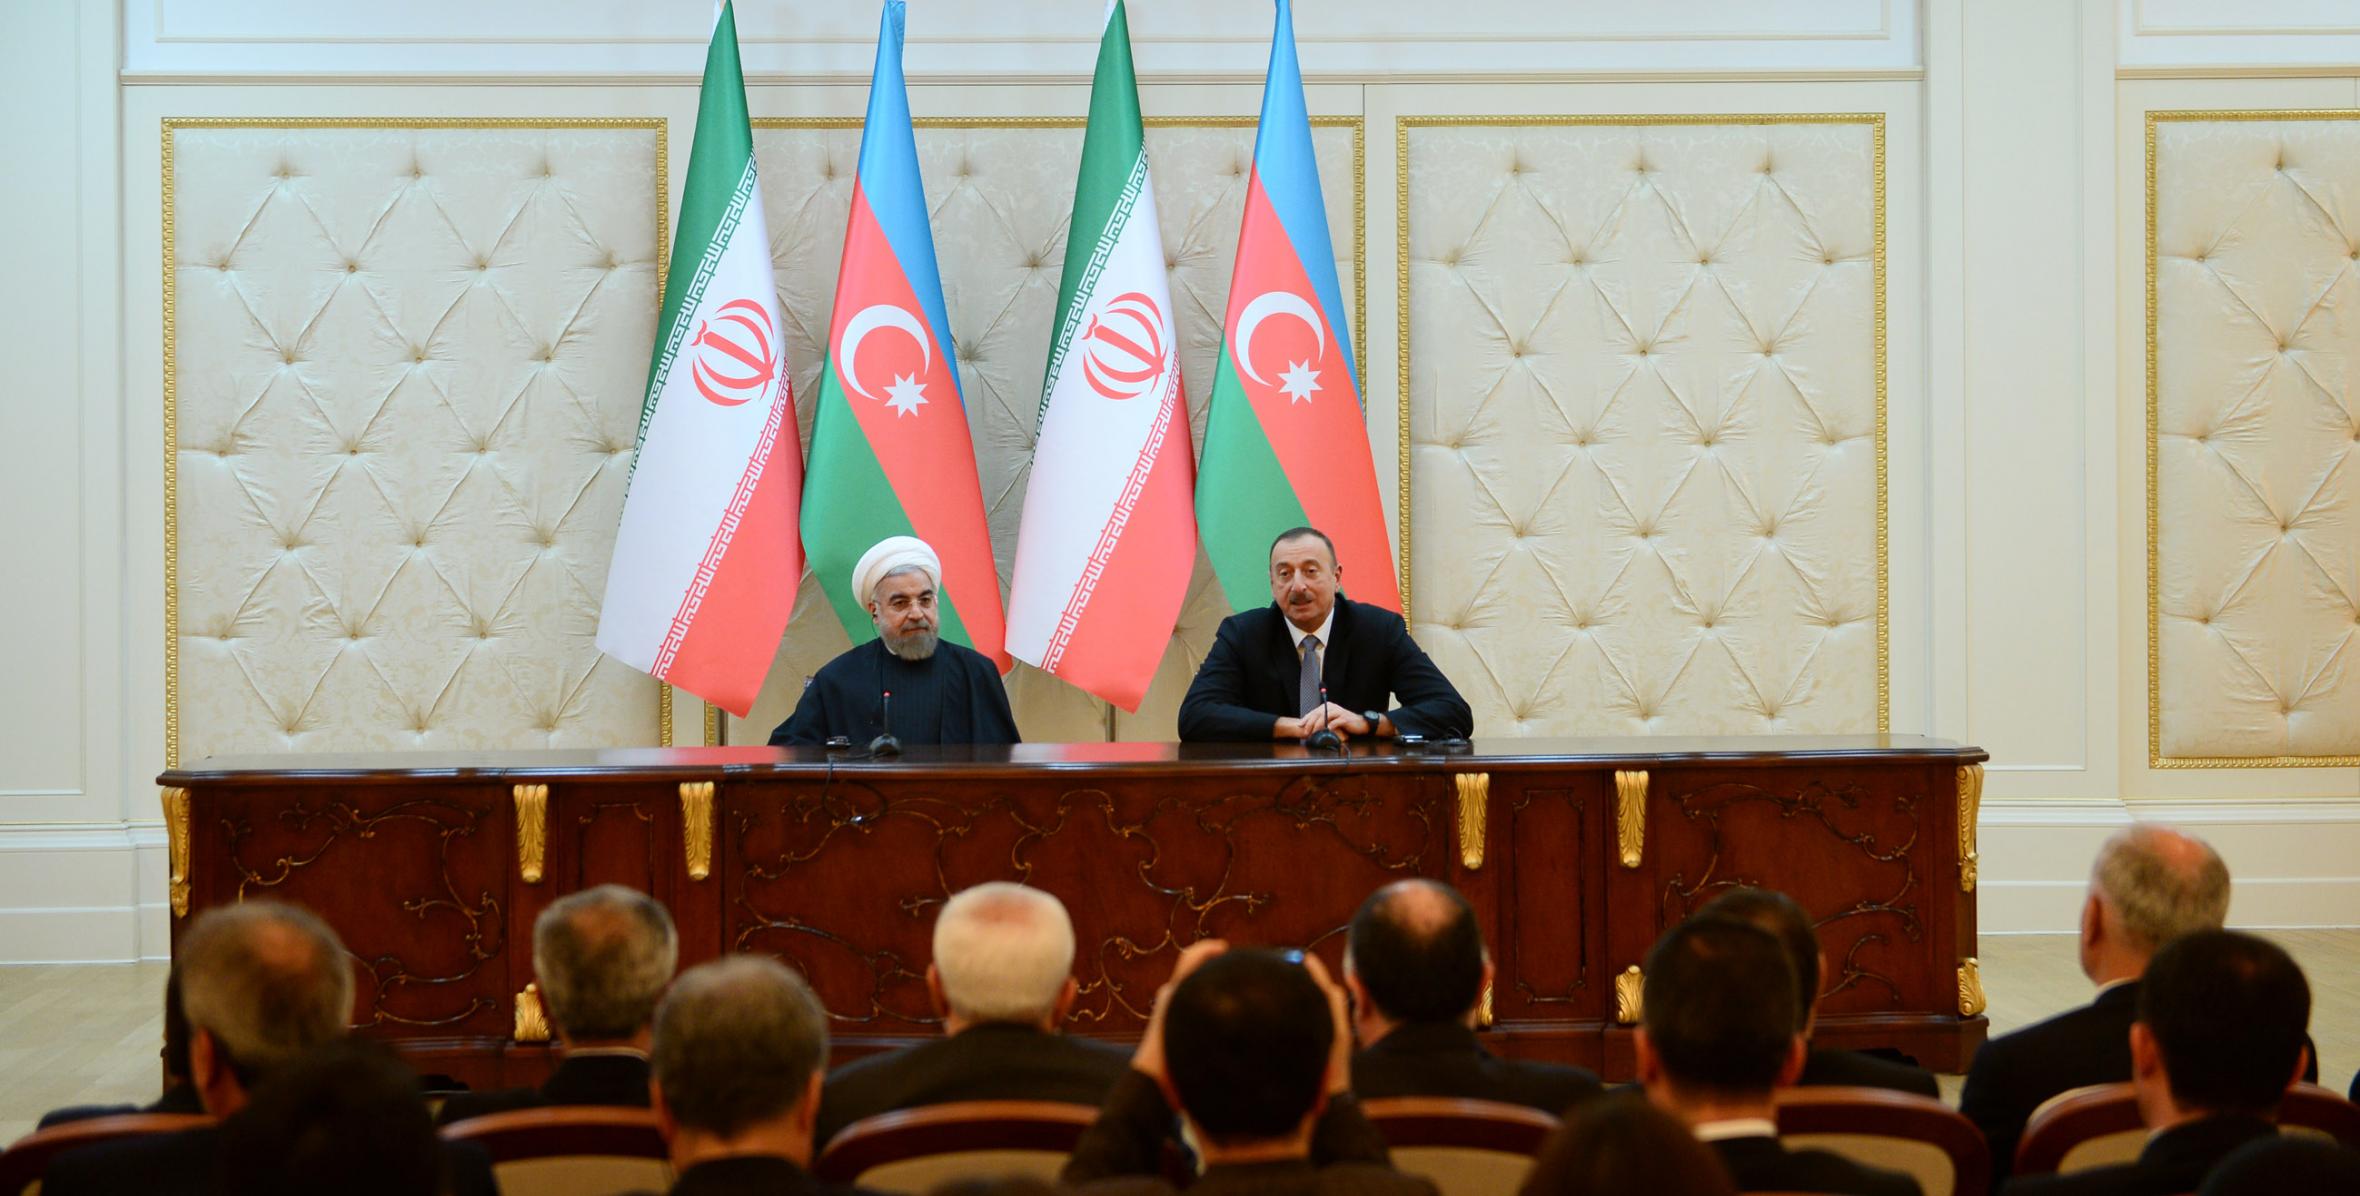 Ilham Aliyev and President of the Islamic Republic of Iran Hassan Rouhani made statements for the press